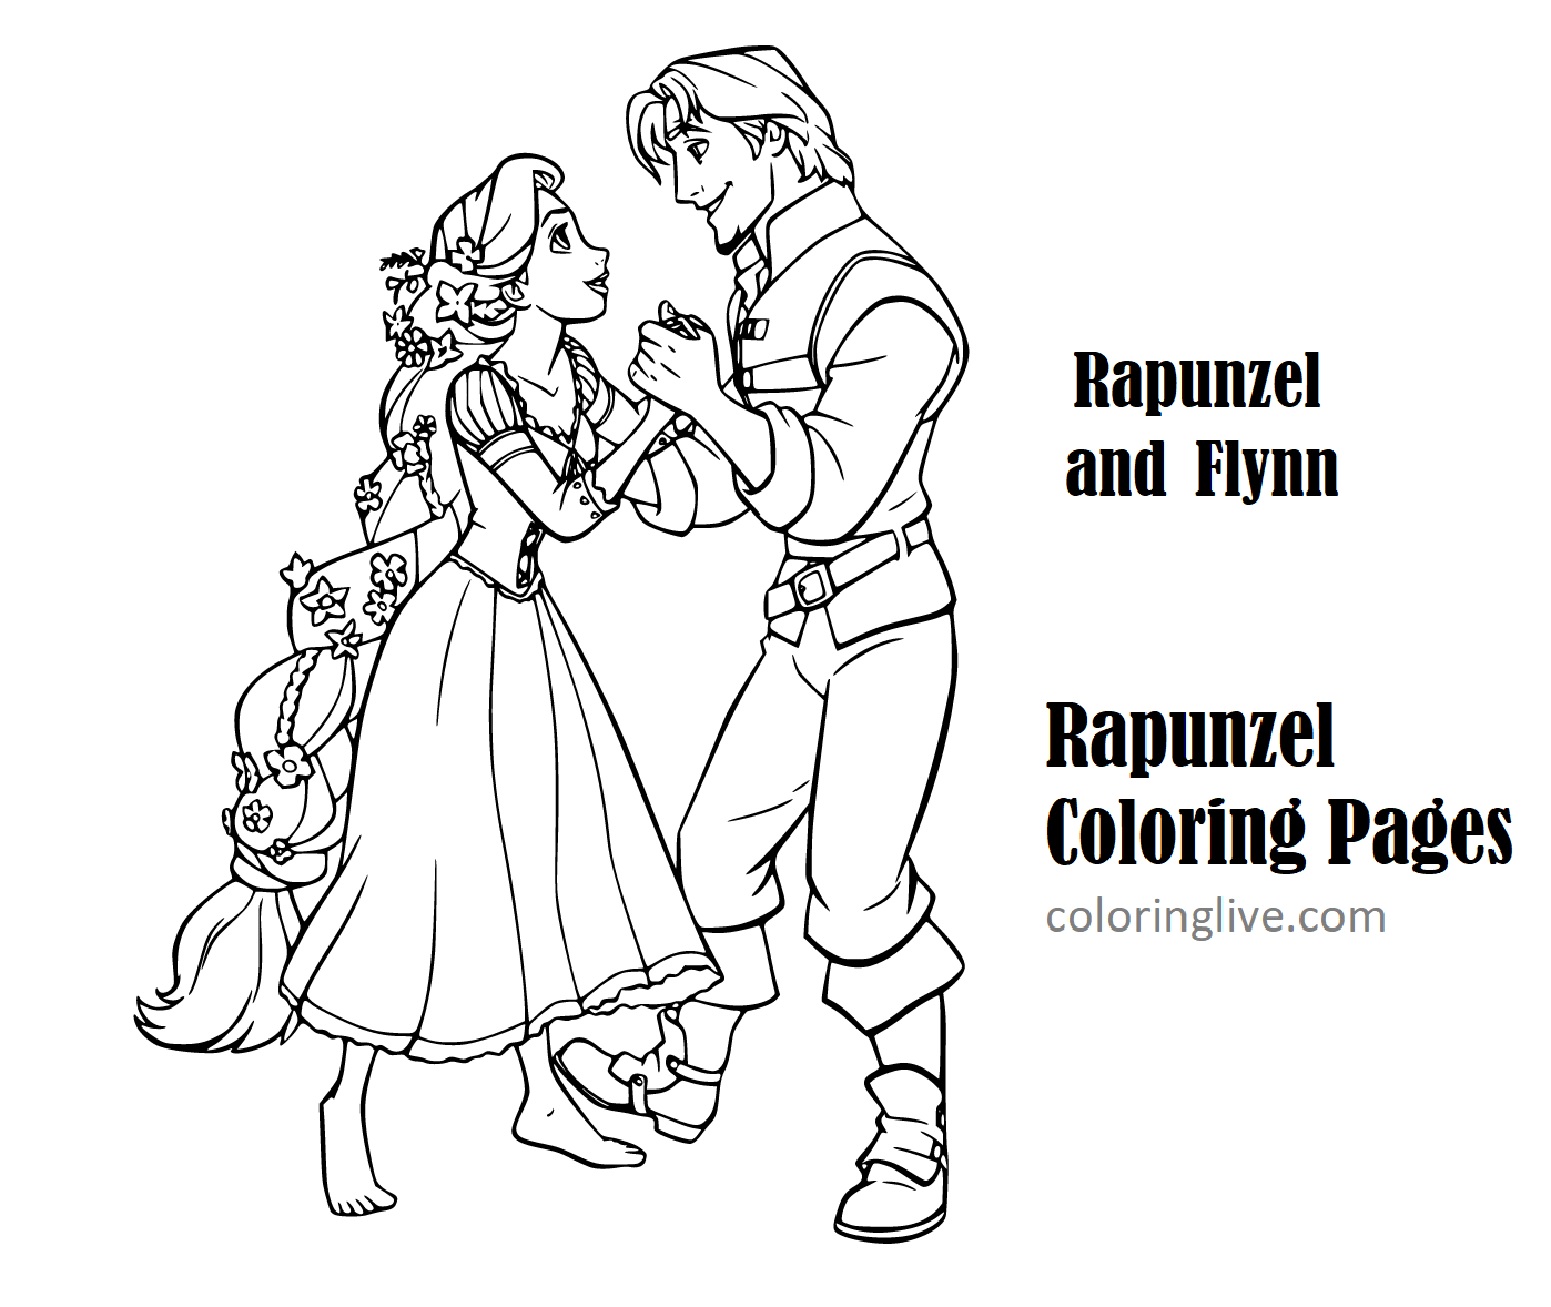 Printable Rapunzel and Flynn Dancing (Tangled) Coloring Page for kids.